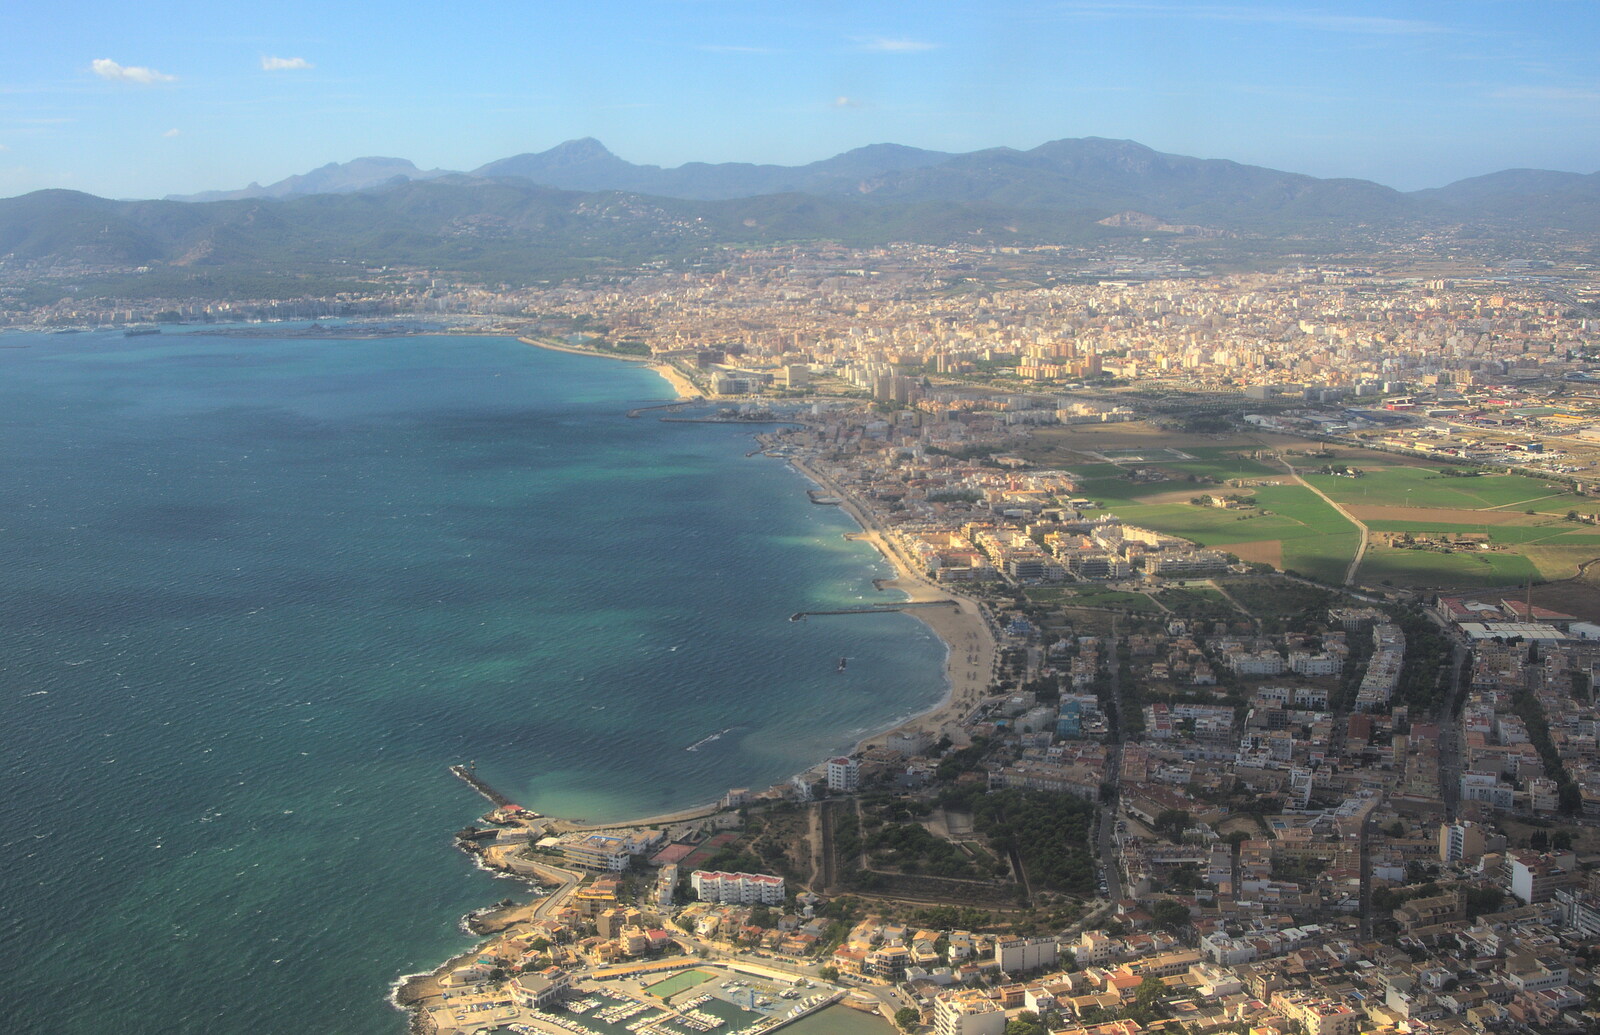 Palma from the air from A Few Hours in Valdemossa, Mallorca, Spain - 13th September 2012